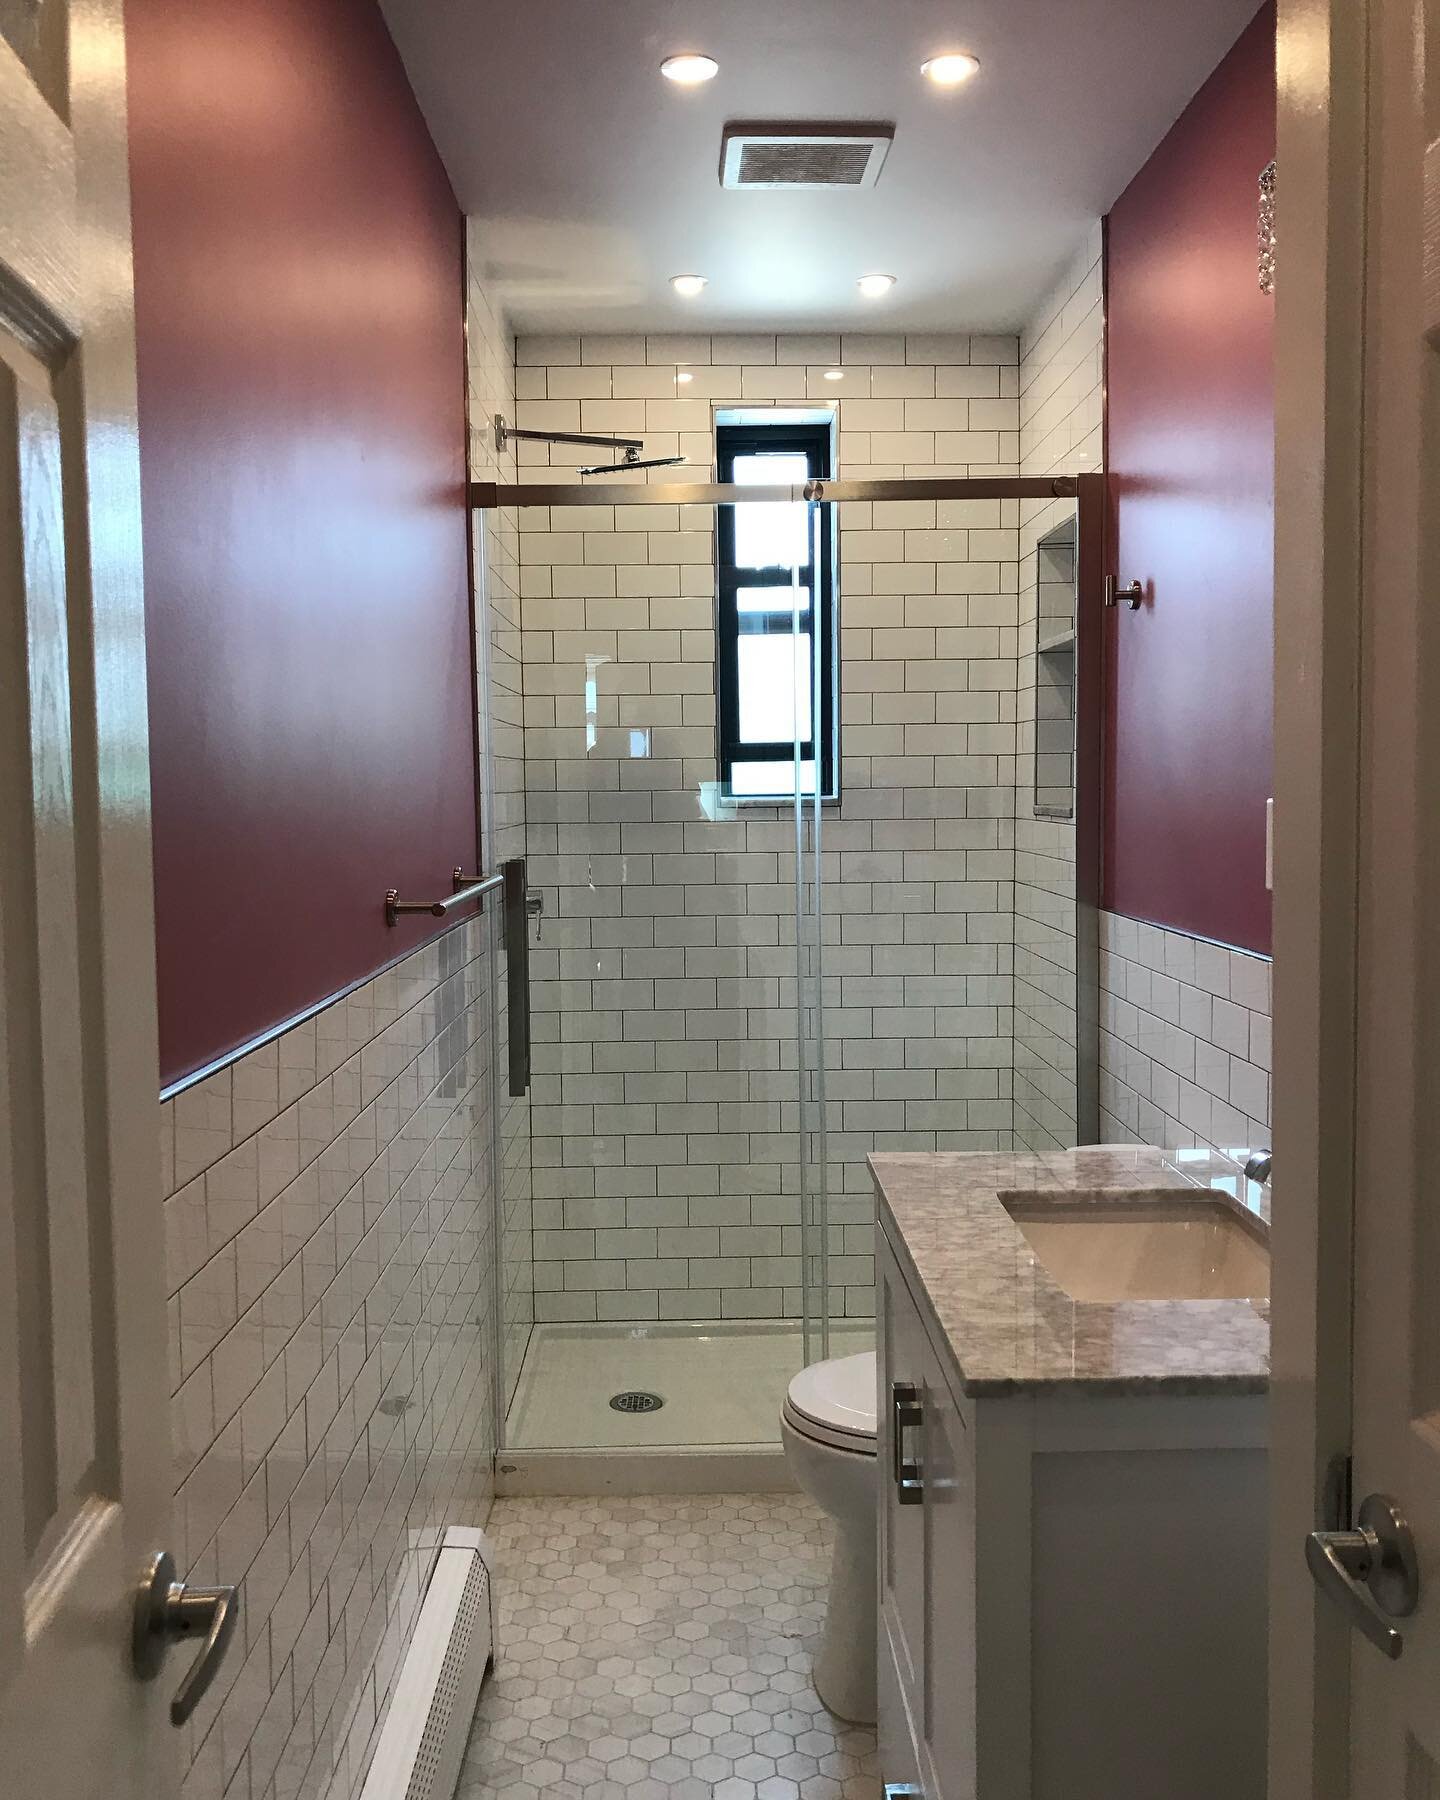 Our Team at ACR Pro Contractors did an excellent job at designing and renovating this Williamsburg, Brooklyn Bathroom featuring Subway Tiles, Carrara Marble Hexagon Floor Tiles, Chrome Moen Shower Body and a Custom Built Shower Alcove with Carrara Ma